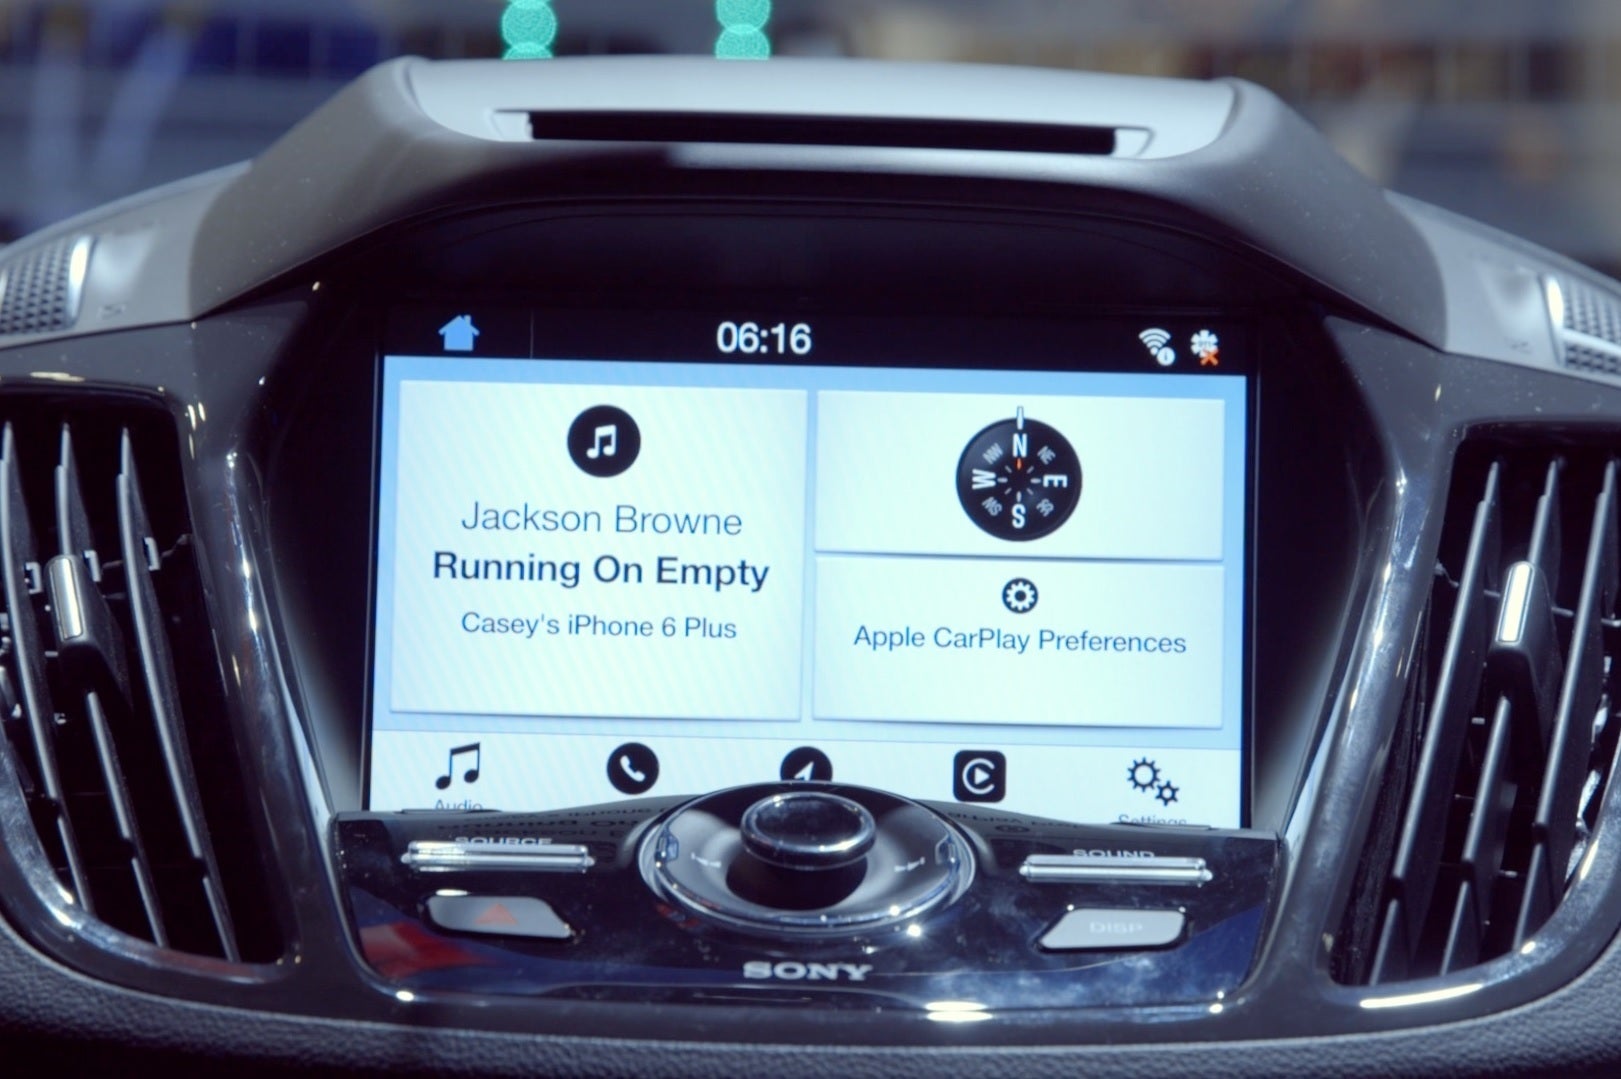 Best frenemies: How Ford SYNC 3 works with Android Auto and Apple